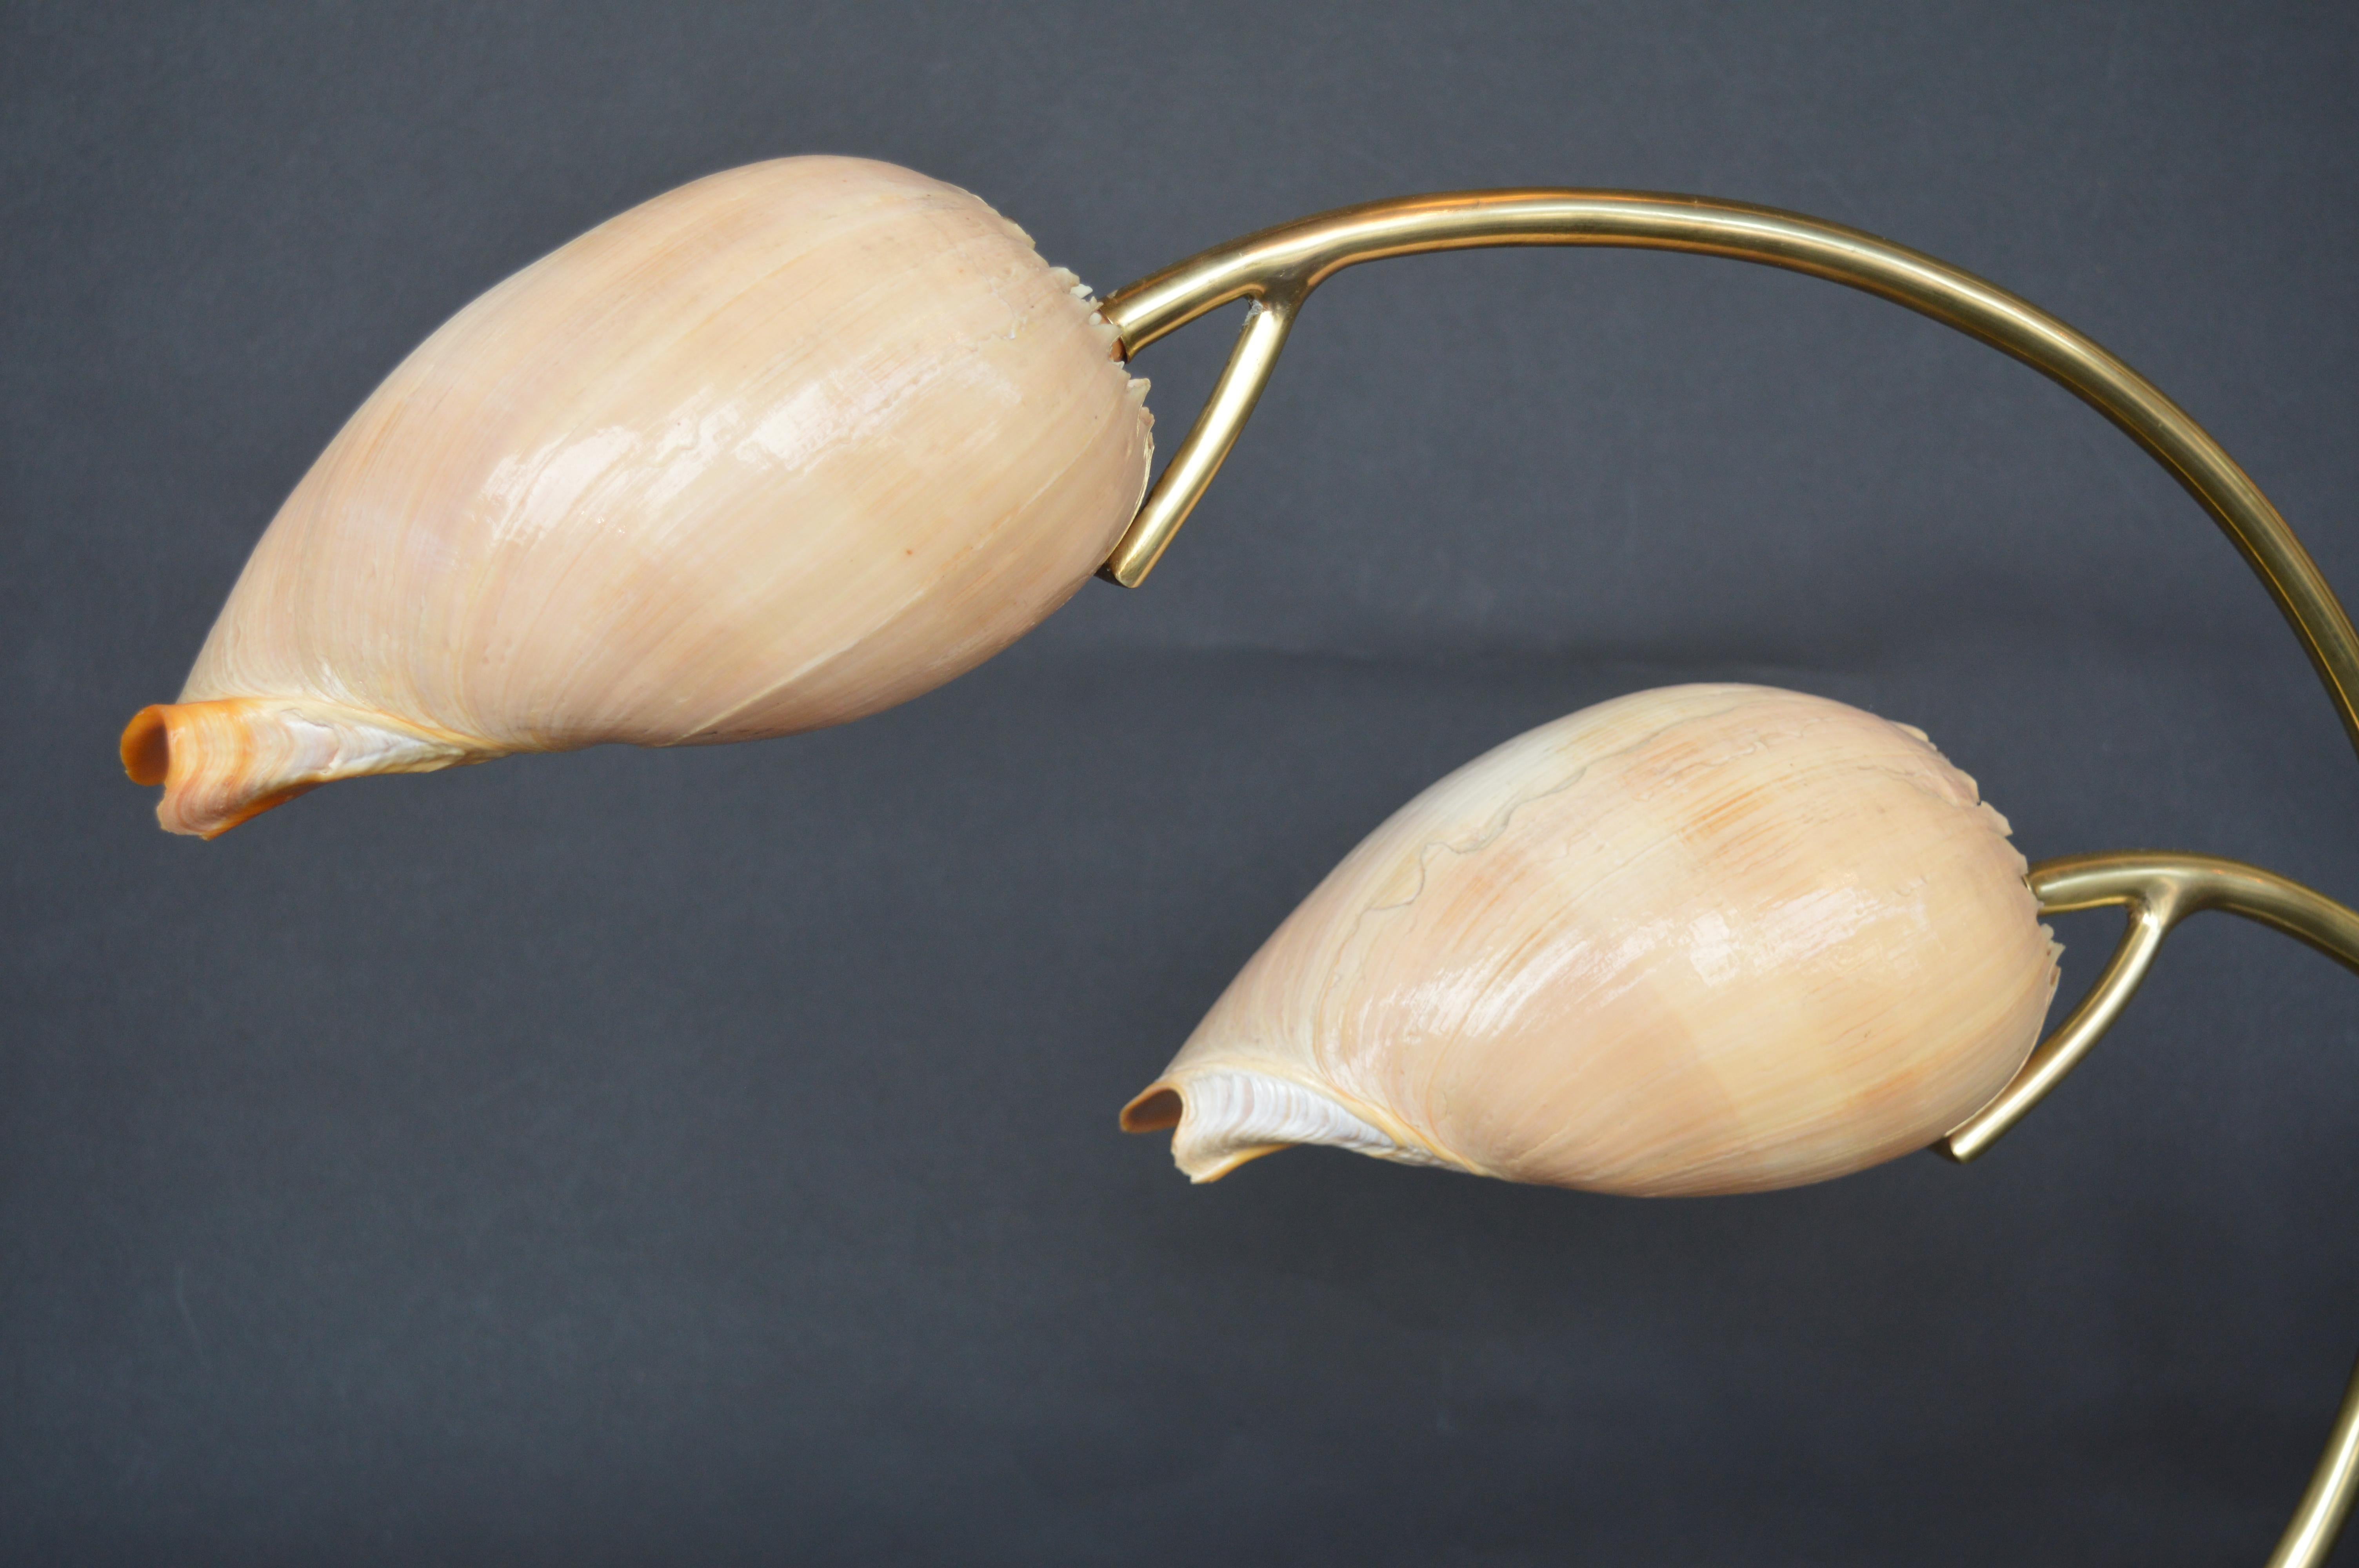 Table lamp with conch sea shell shades. Brass stem.